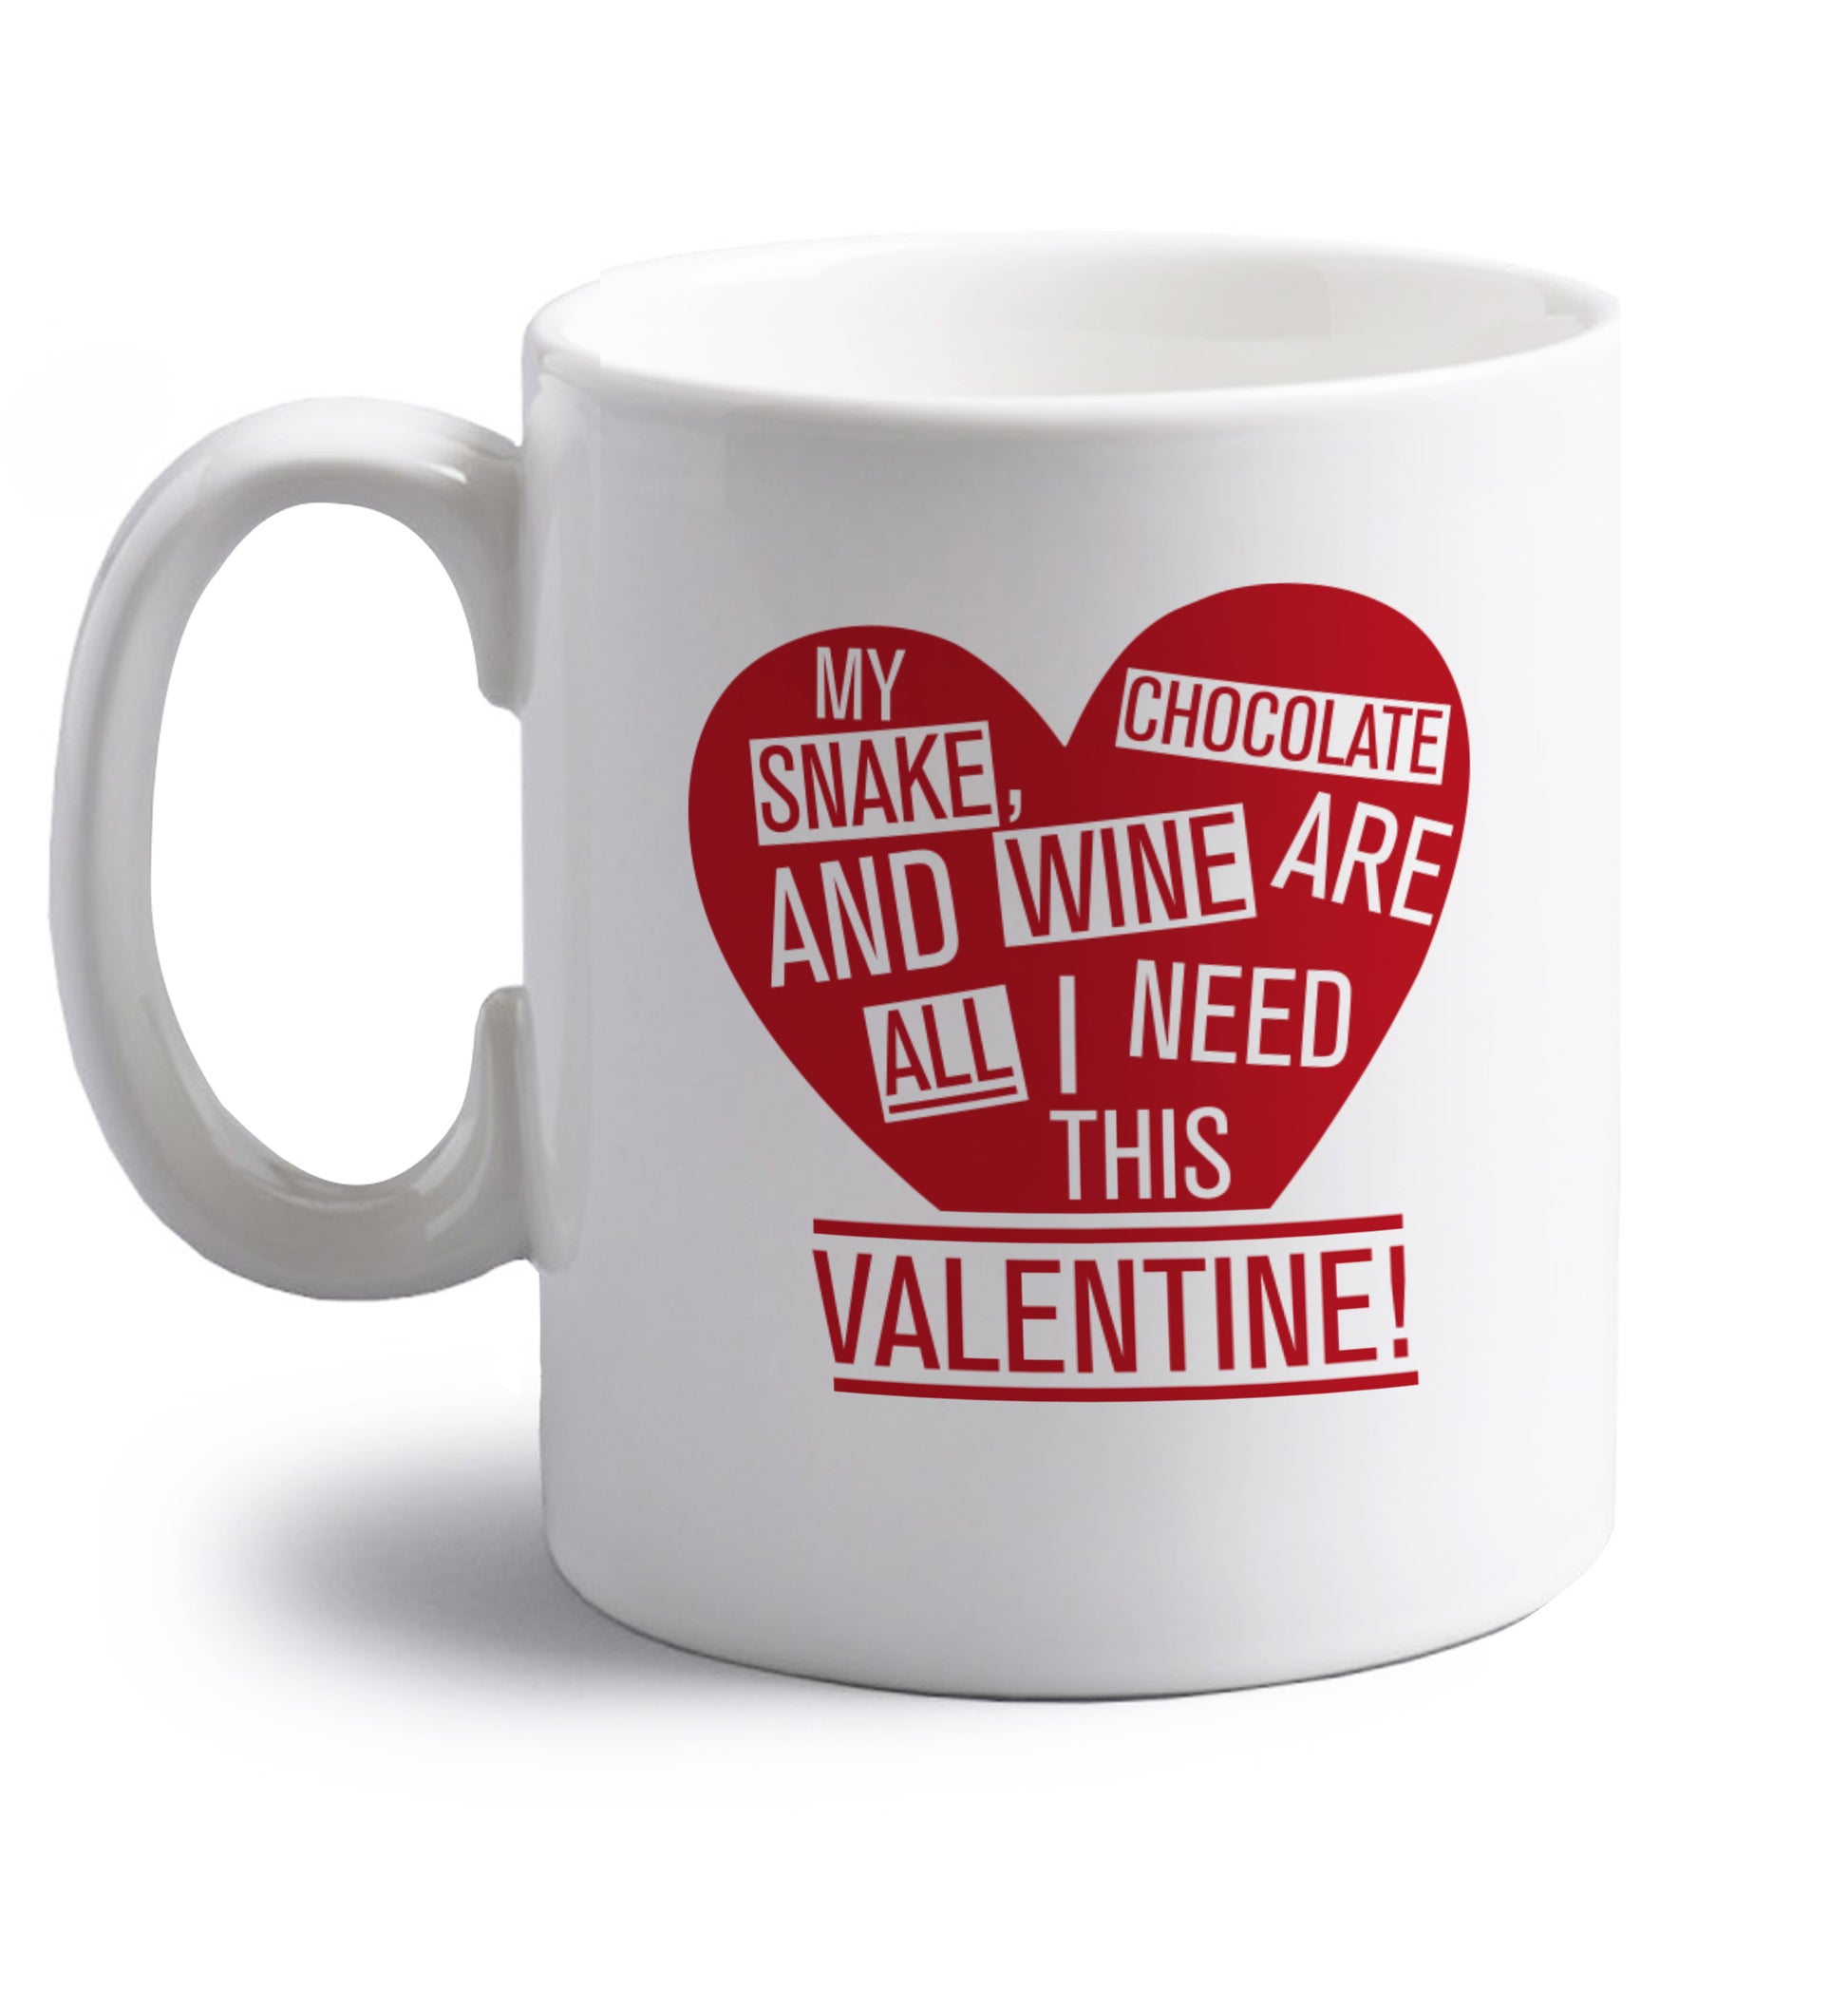 My snake, chocolate and wine are all I need this valentine! right handed white ceramic mug 